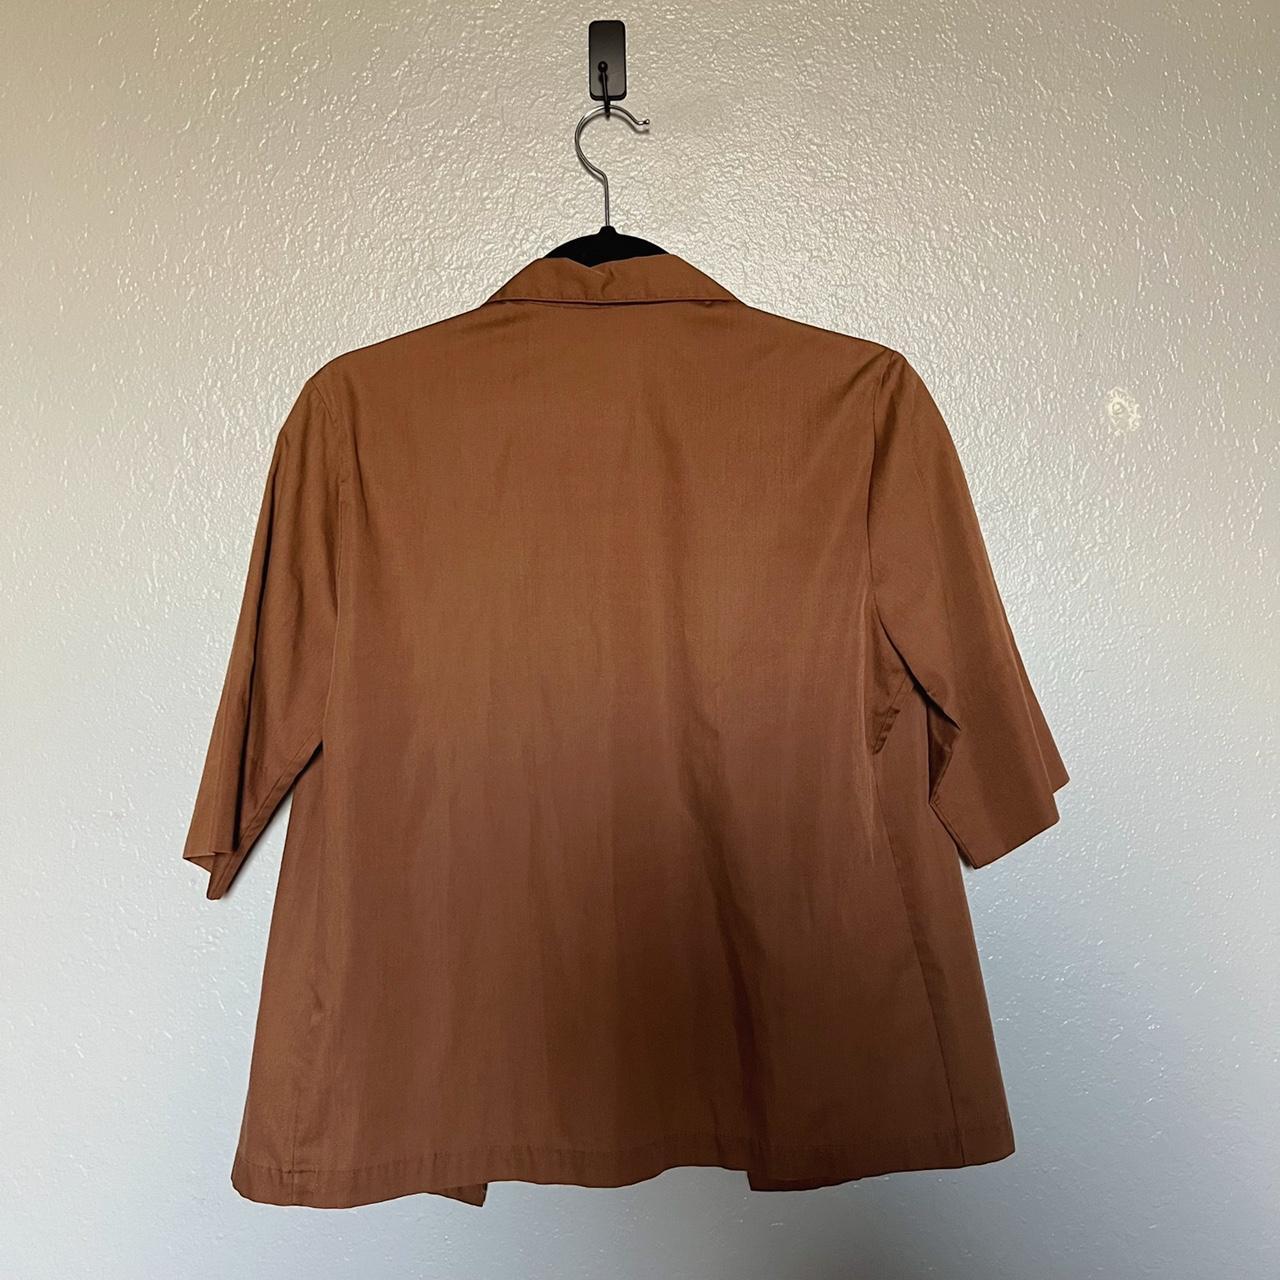 Sears Women's Brown and Tan Blouse (2)